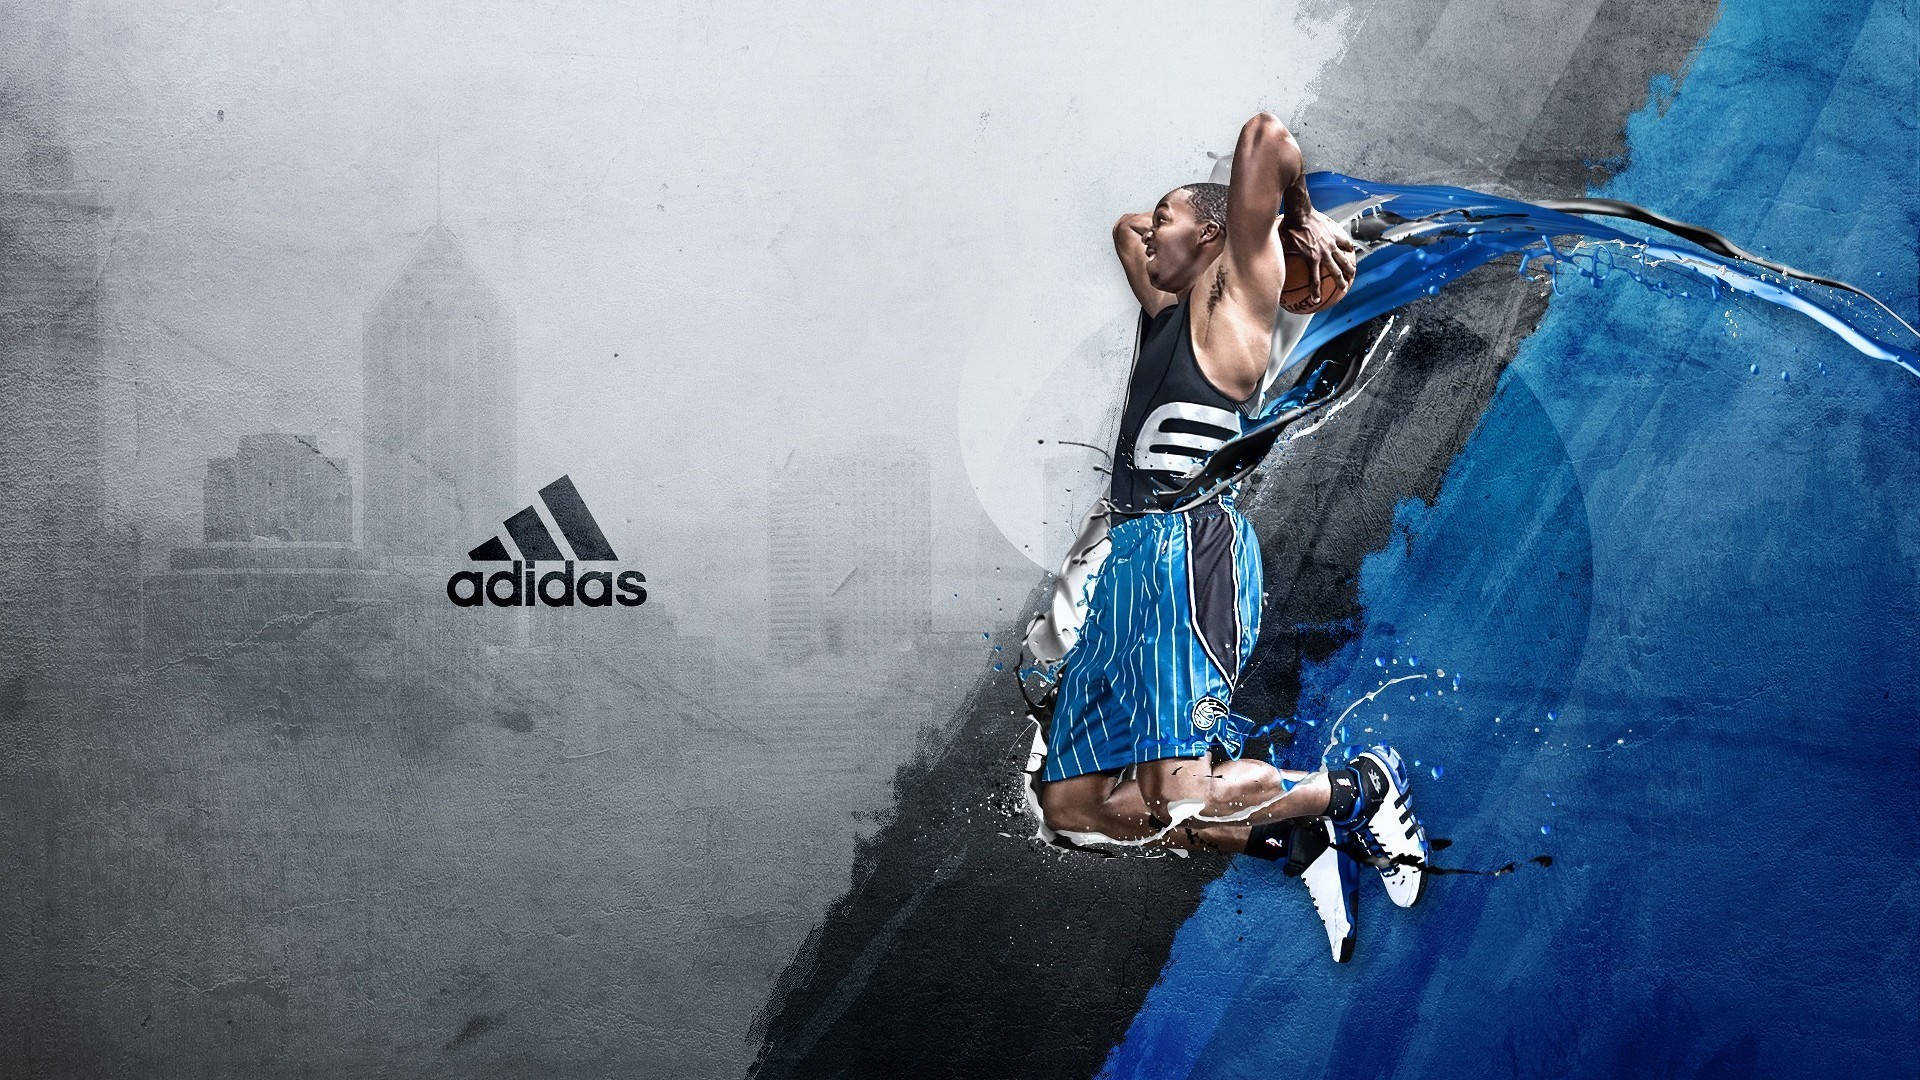 Adidas Shoes Hd Sports Background